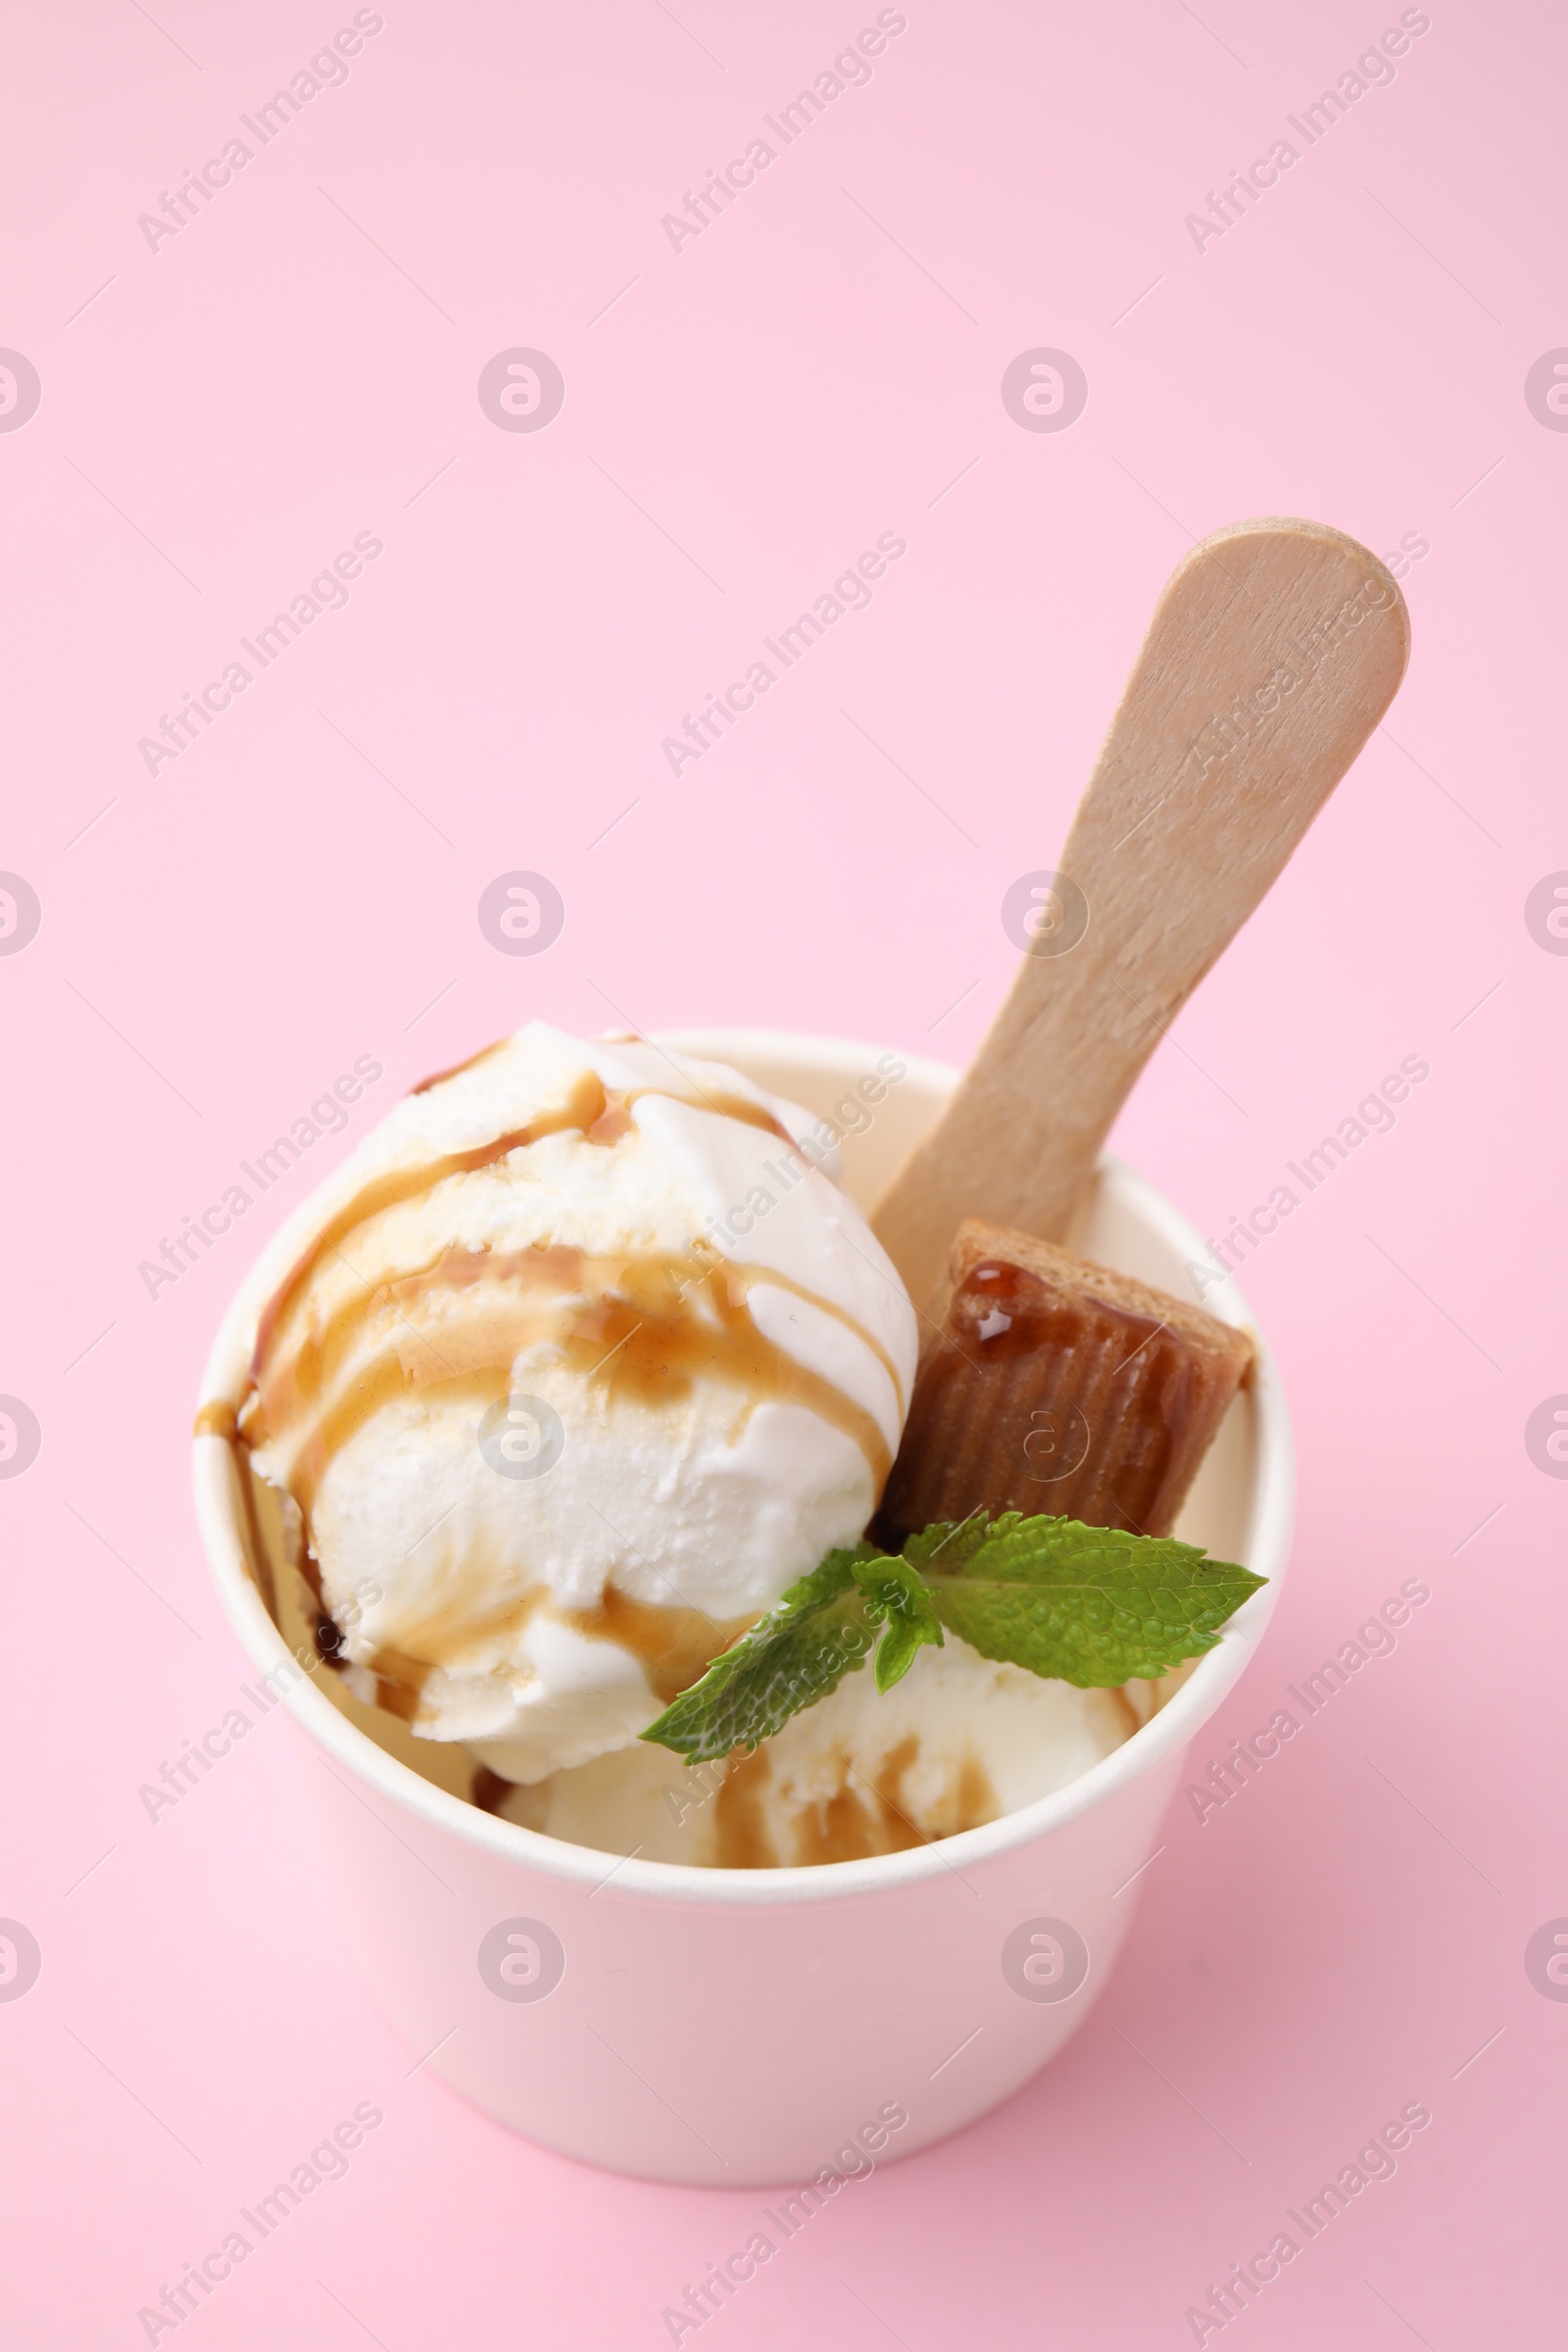 Photo of Tasty ice cream with caramel sauce, mint leaves and candy in paper cup on pink table